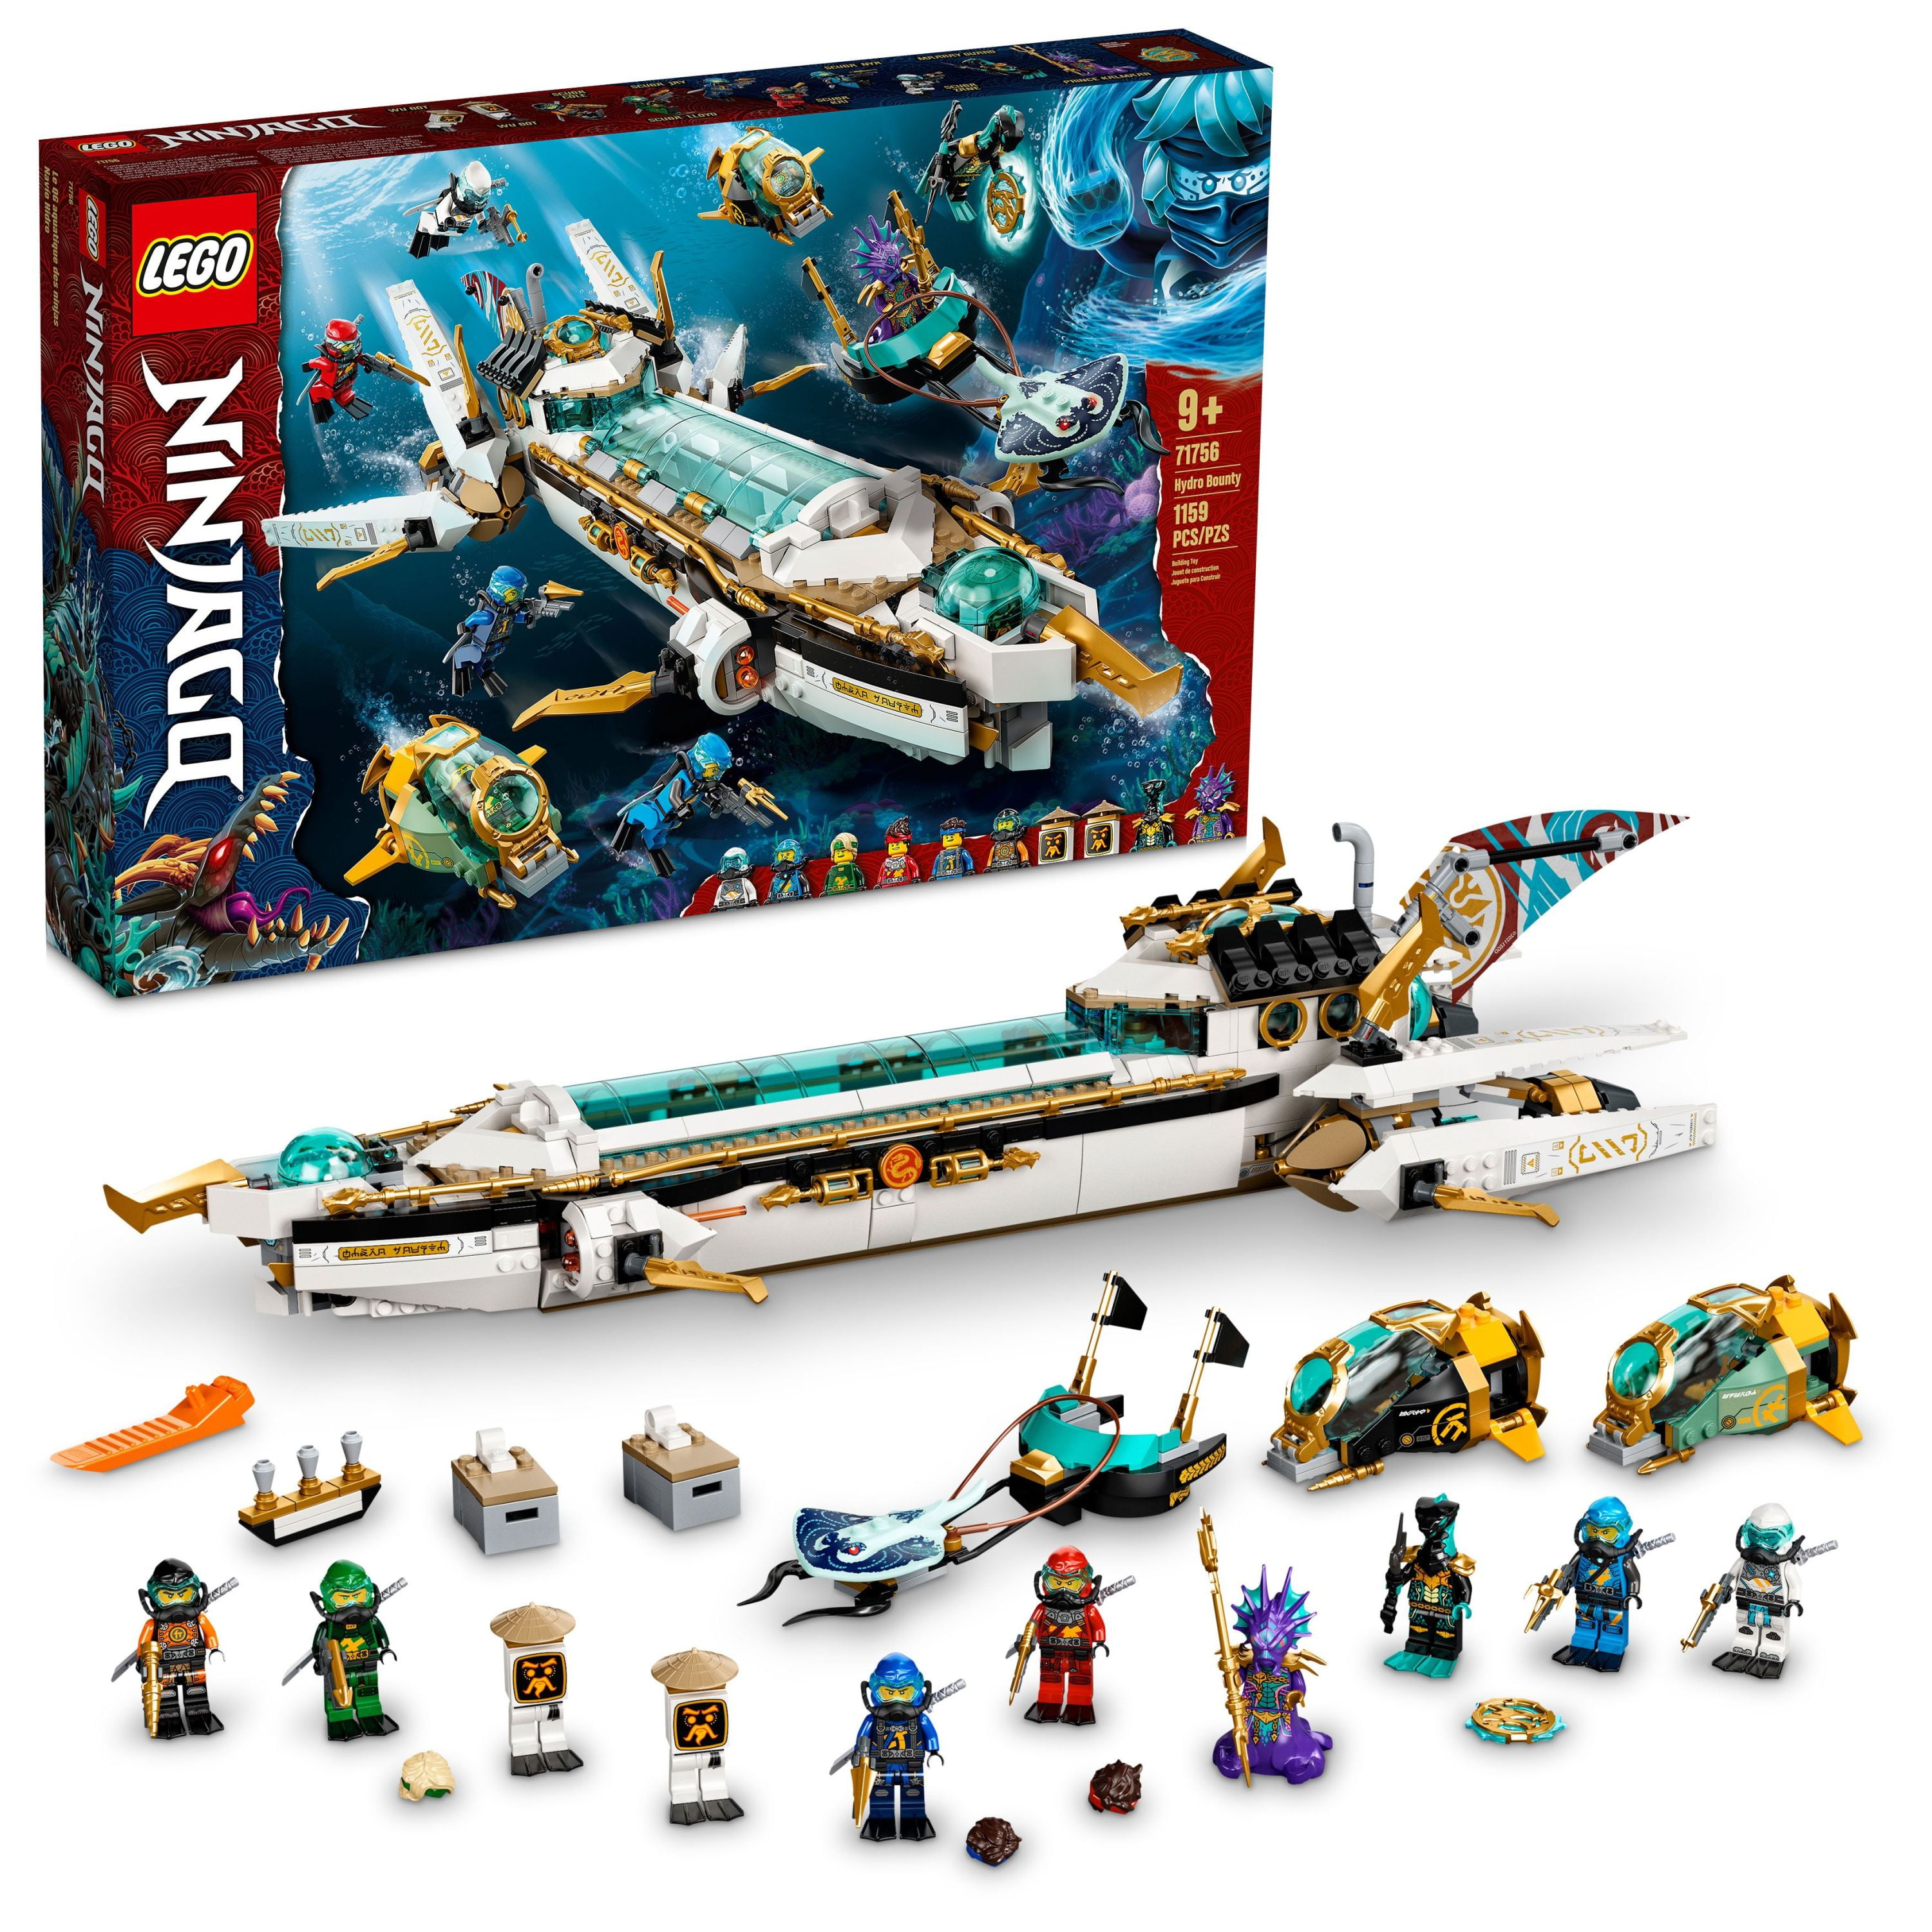 LEGO NINJAGO Hydro Bounty Building Set, 71756 Toy with Kai and Minifigures, Ninja Toys, Gifts, for Kids, Boys, Girls Age 9 Plus Years Old Walmart.com